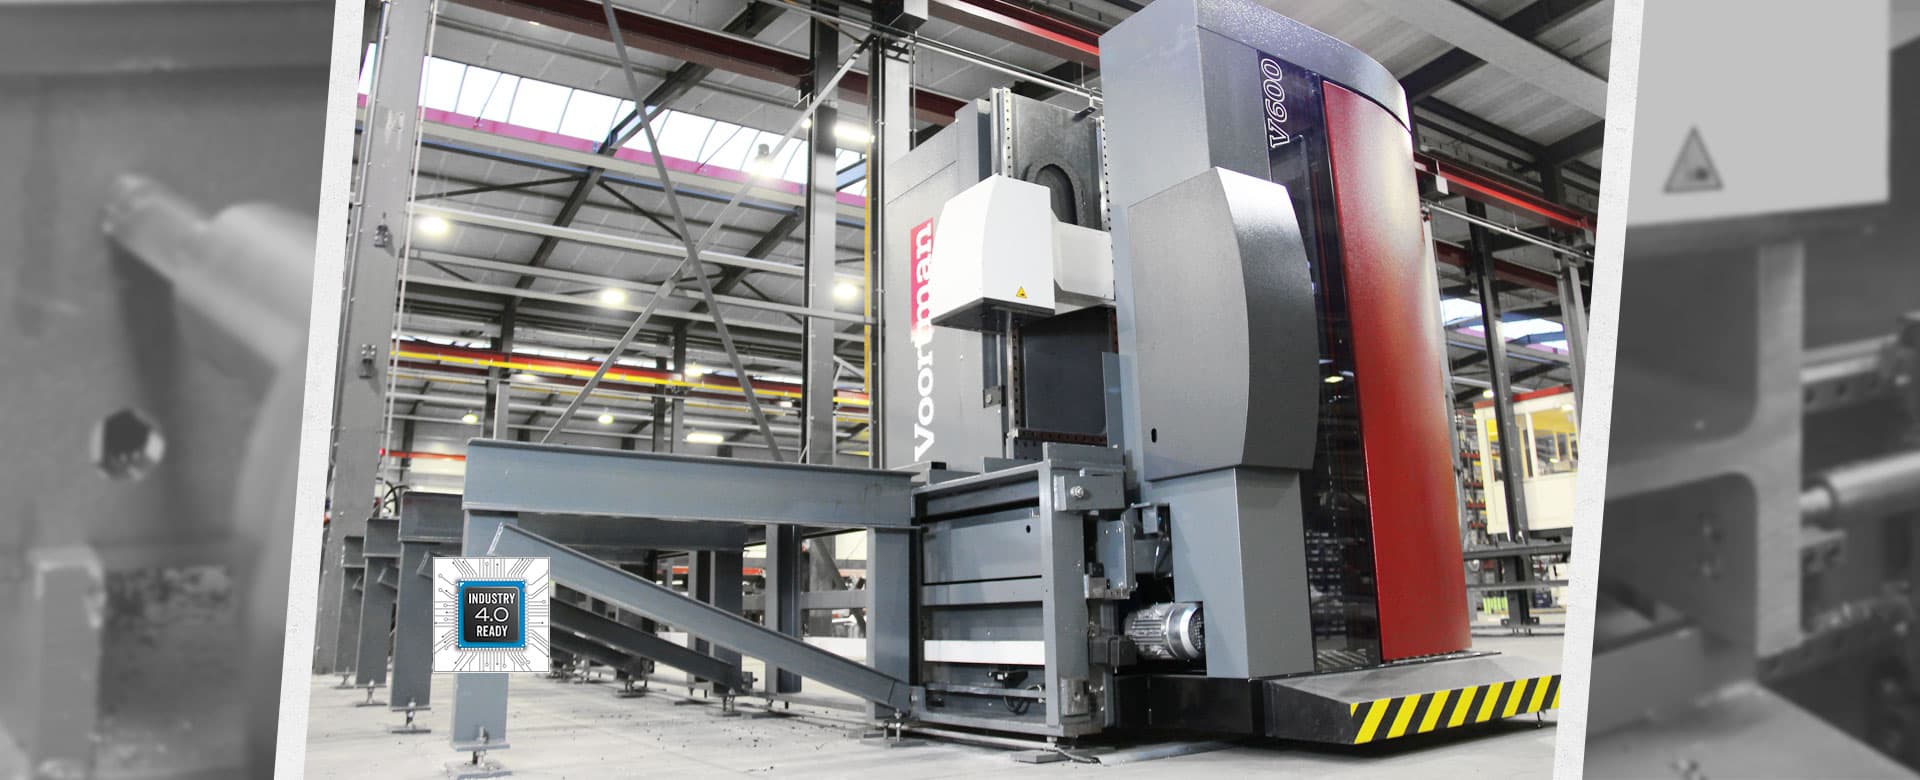 Gulf States Saw & Machine Co. offers the Voortman V600 dirlling machine that offers beam processing on a small footprint.